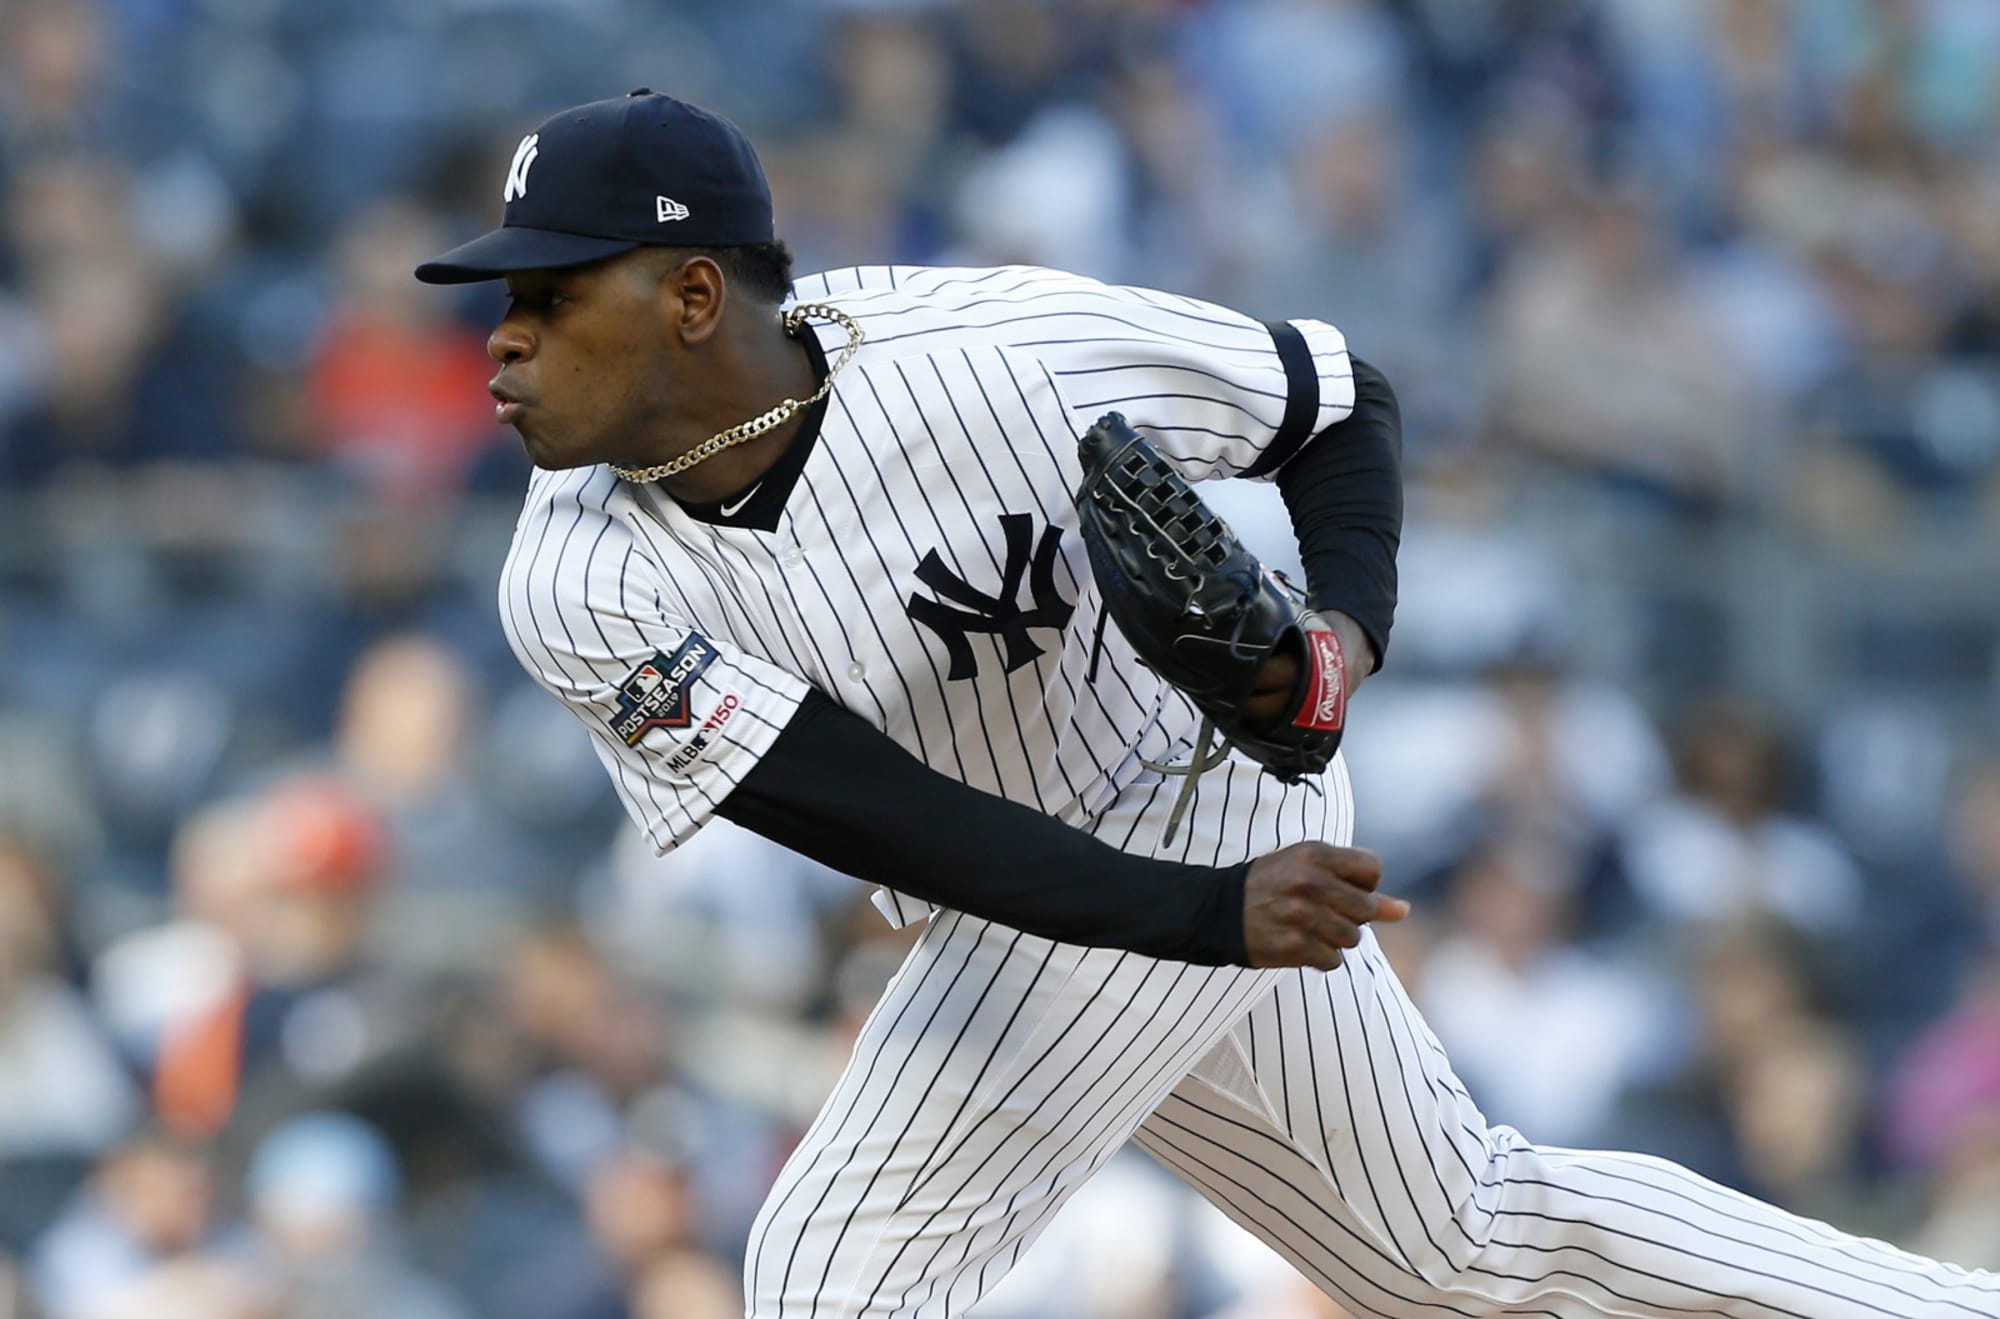 Yankees' Luis Severino recommended to have Tommy John surgery